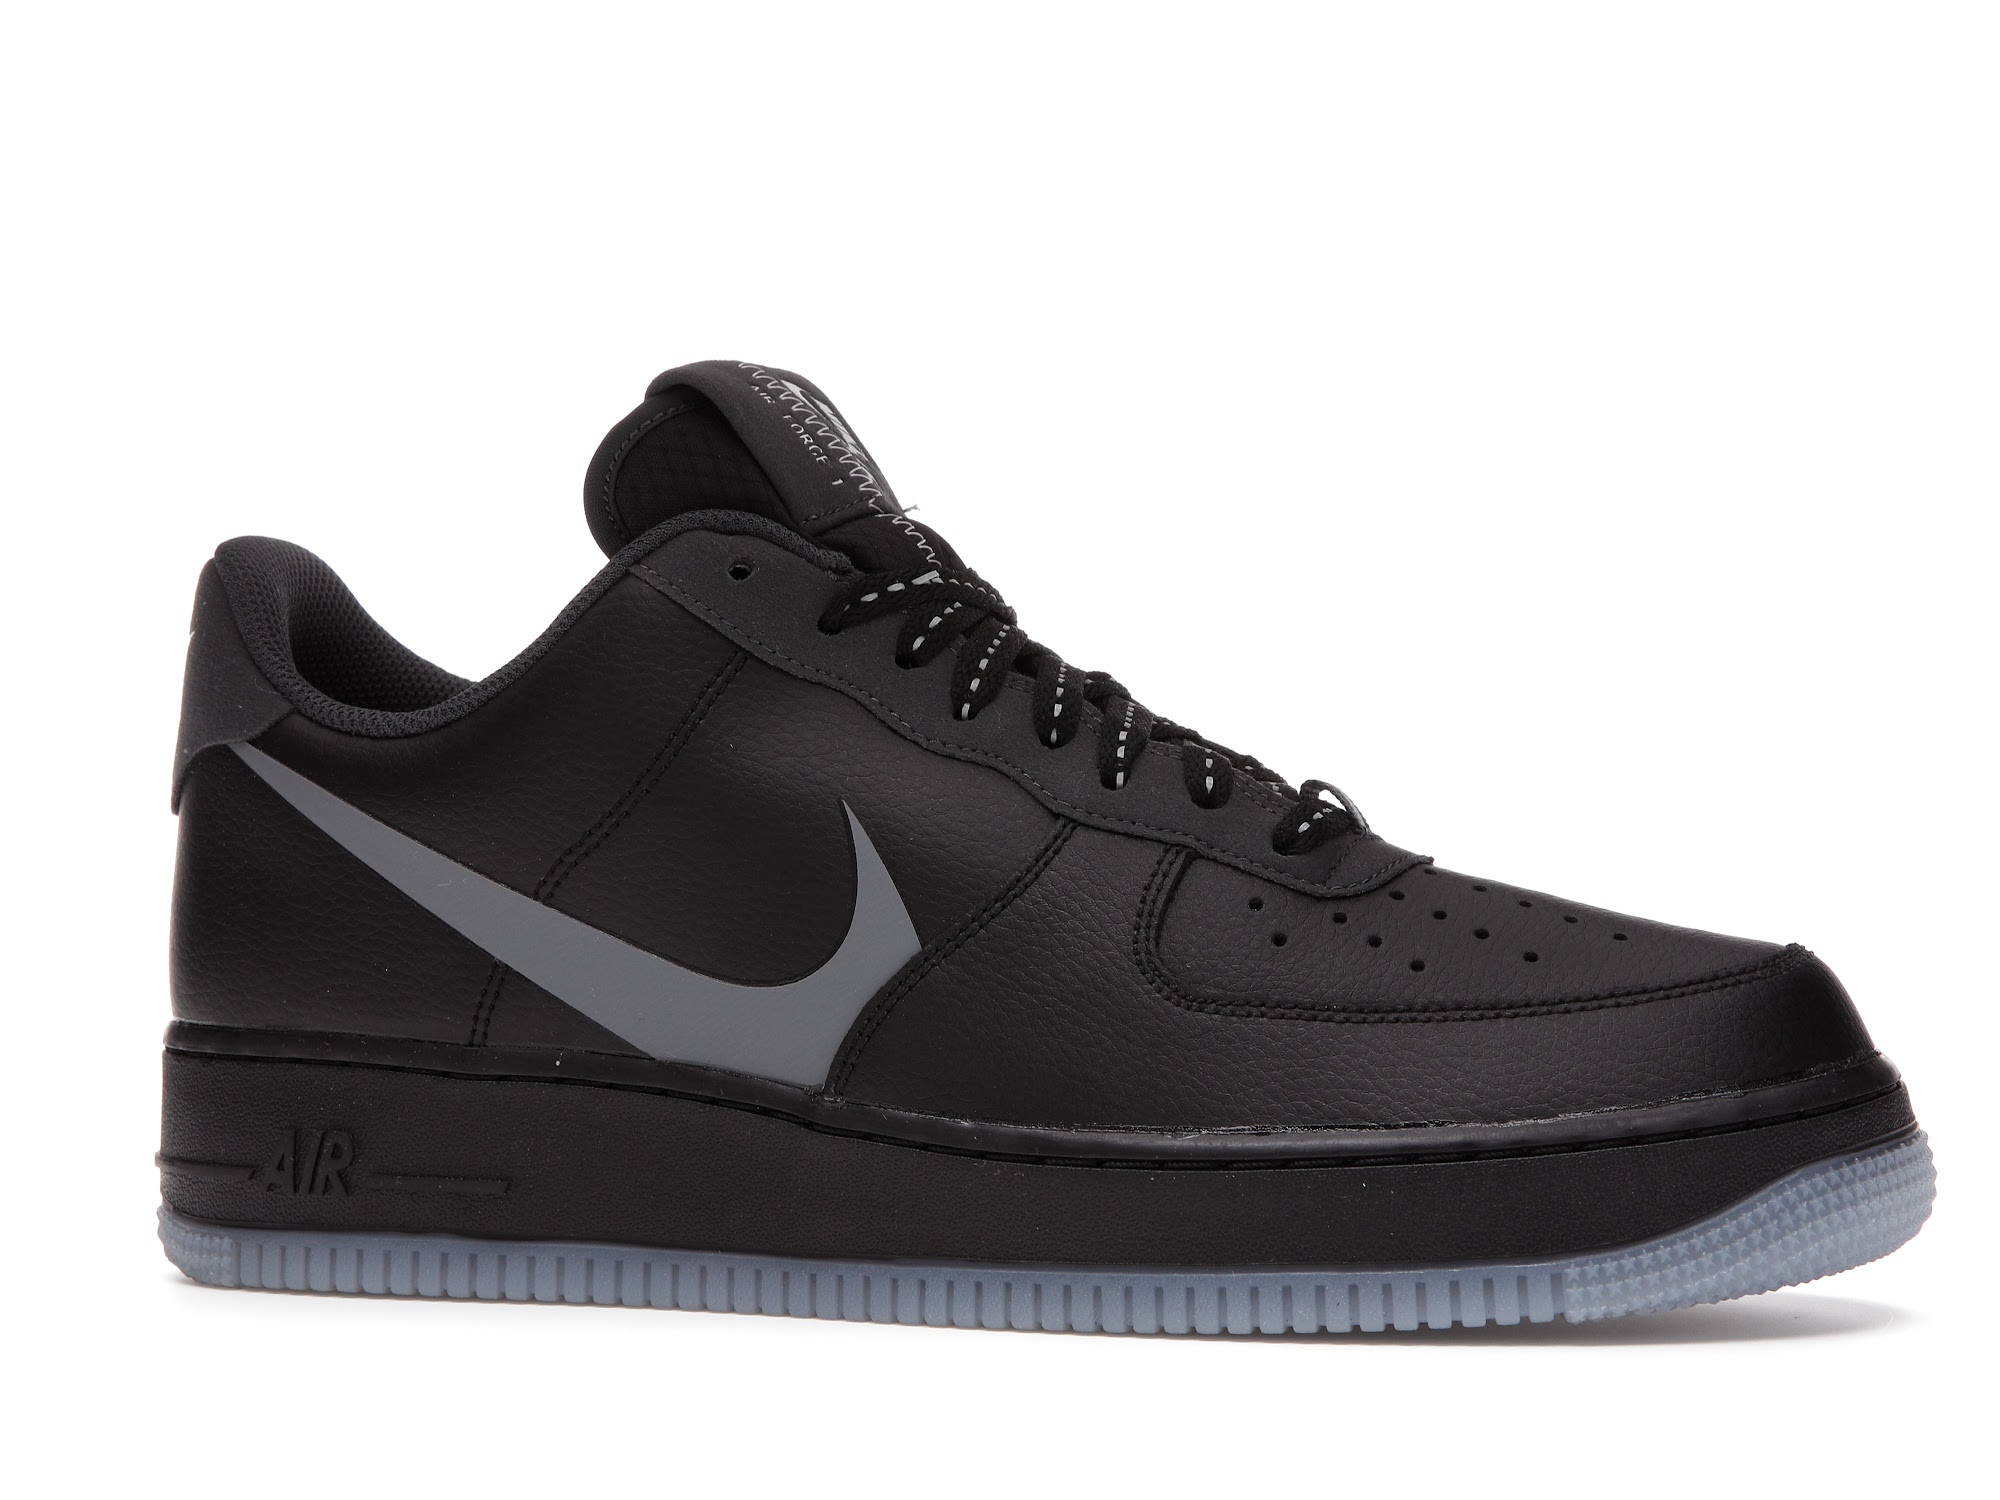 Nike Air Force 1 '07 LV8 Black/Anthracite